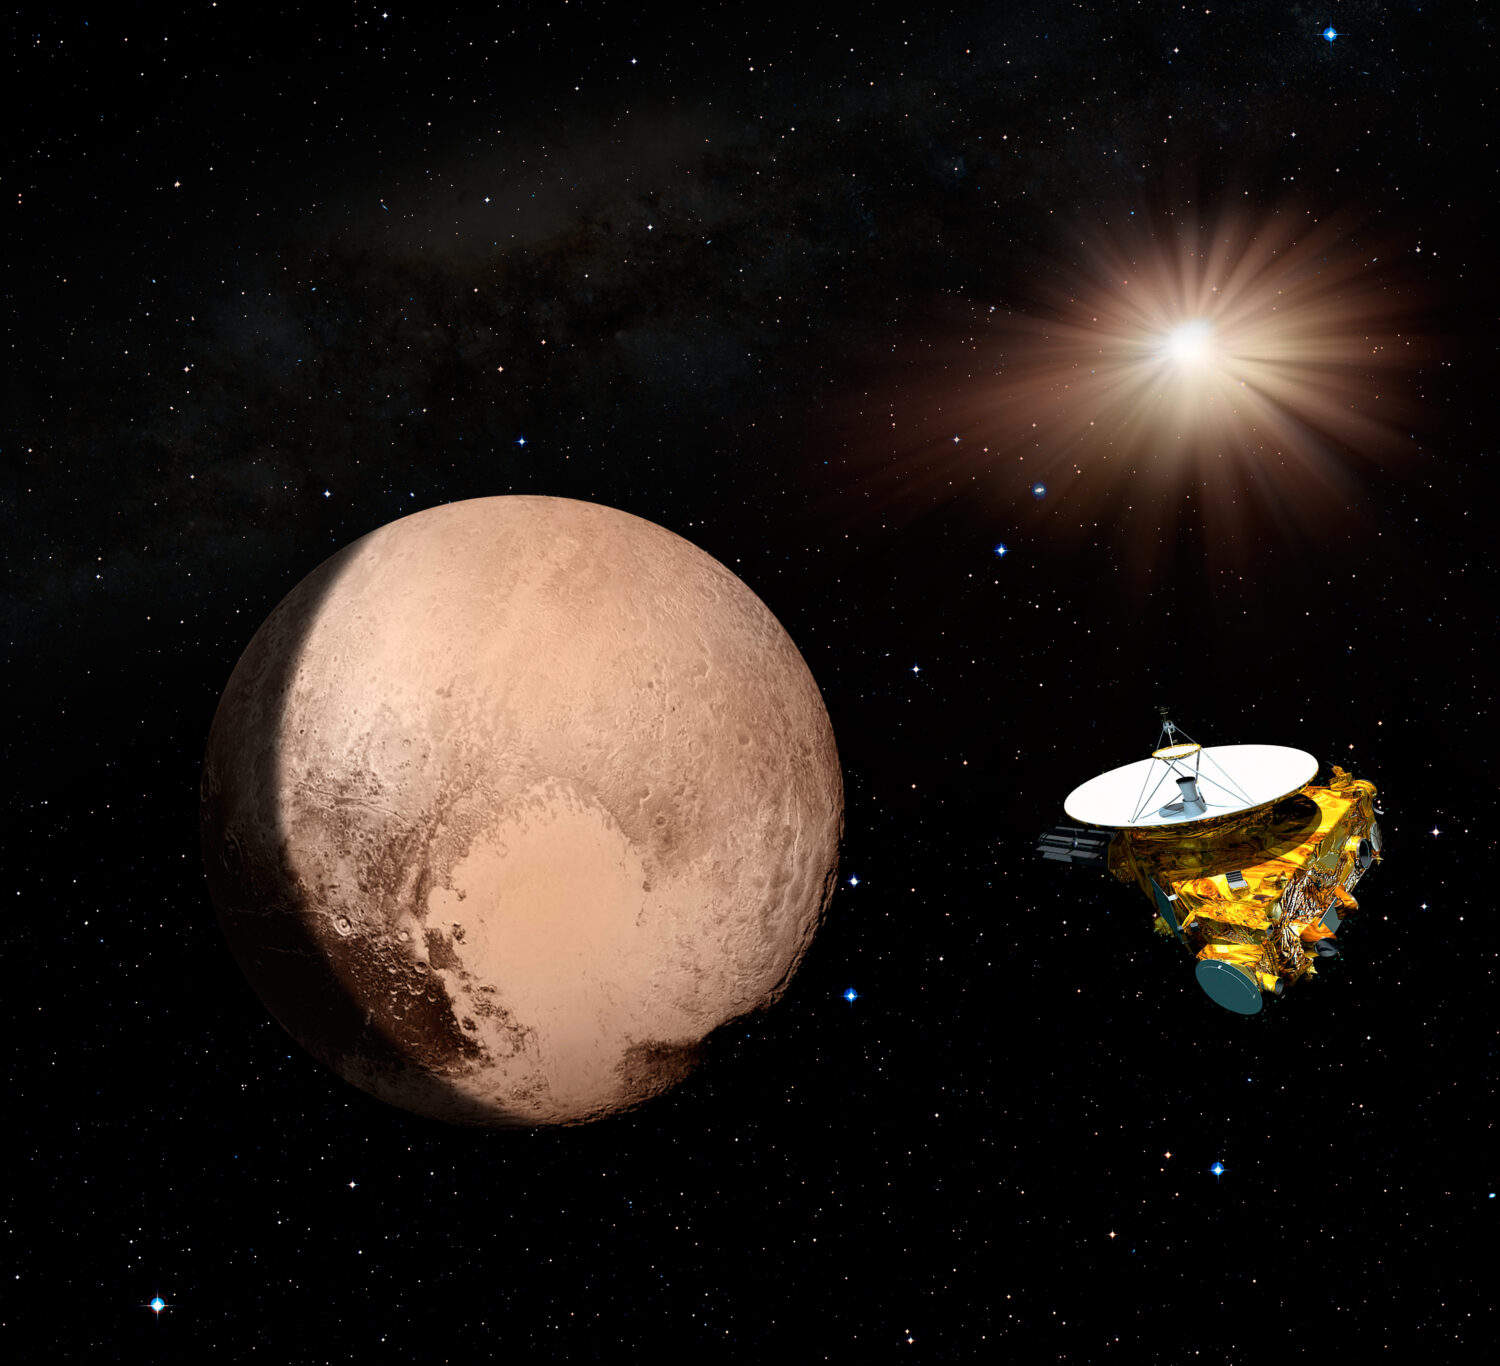 New Horizons spacecraft and Pluto "Elements of this image furnished by NASA "